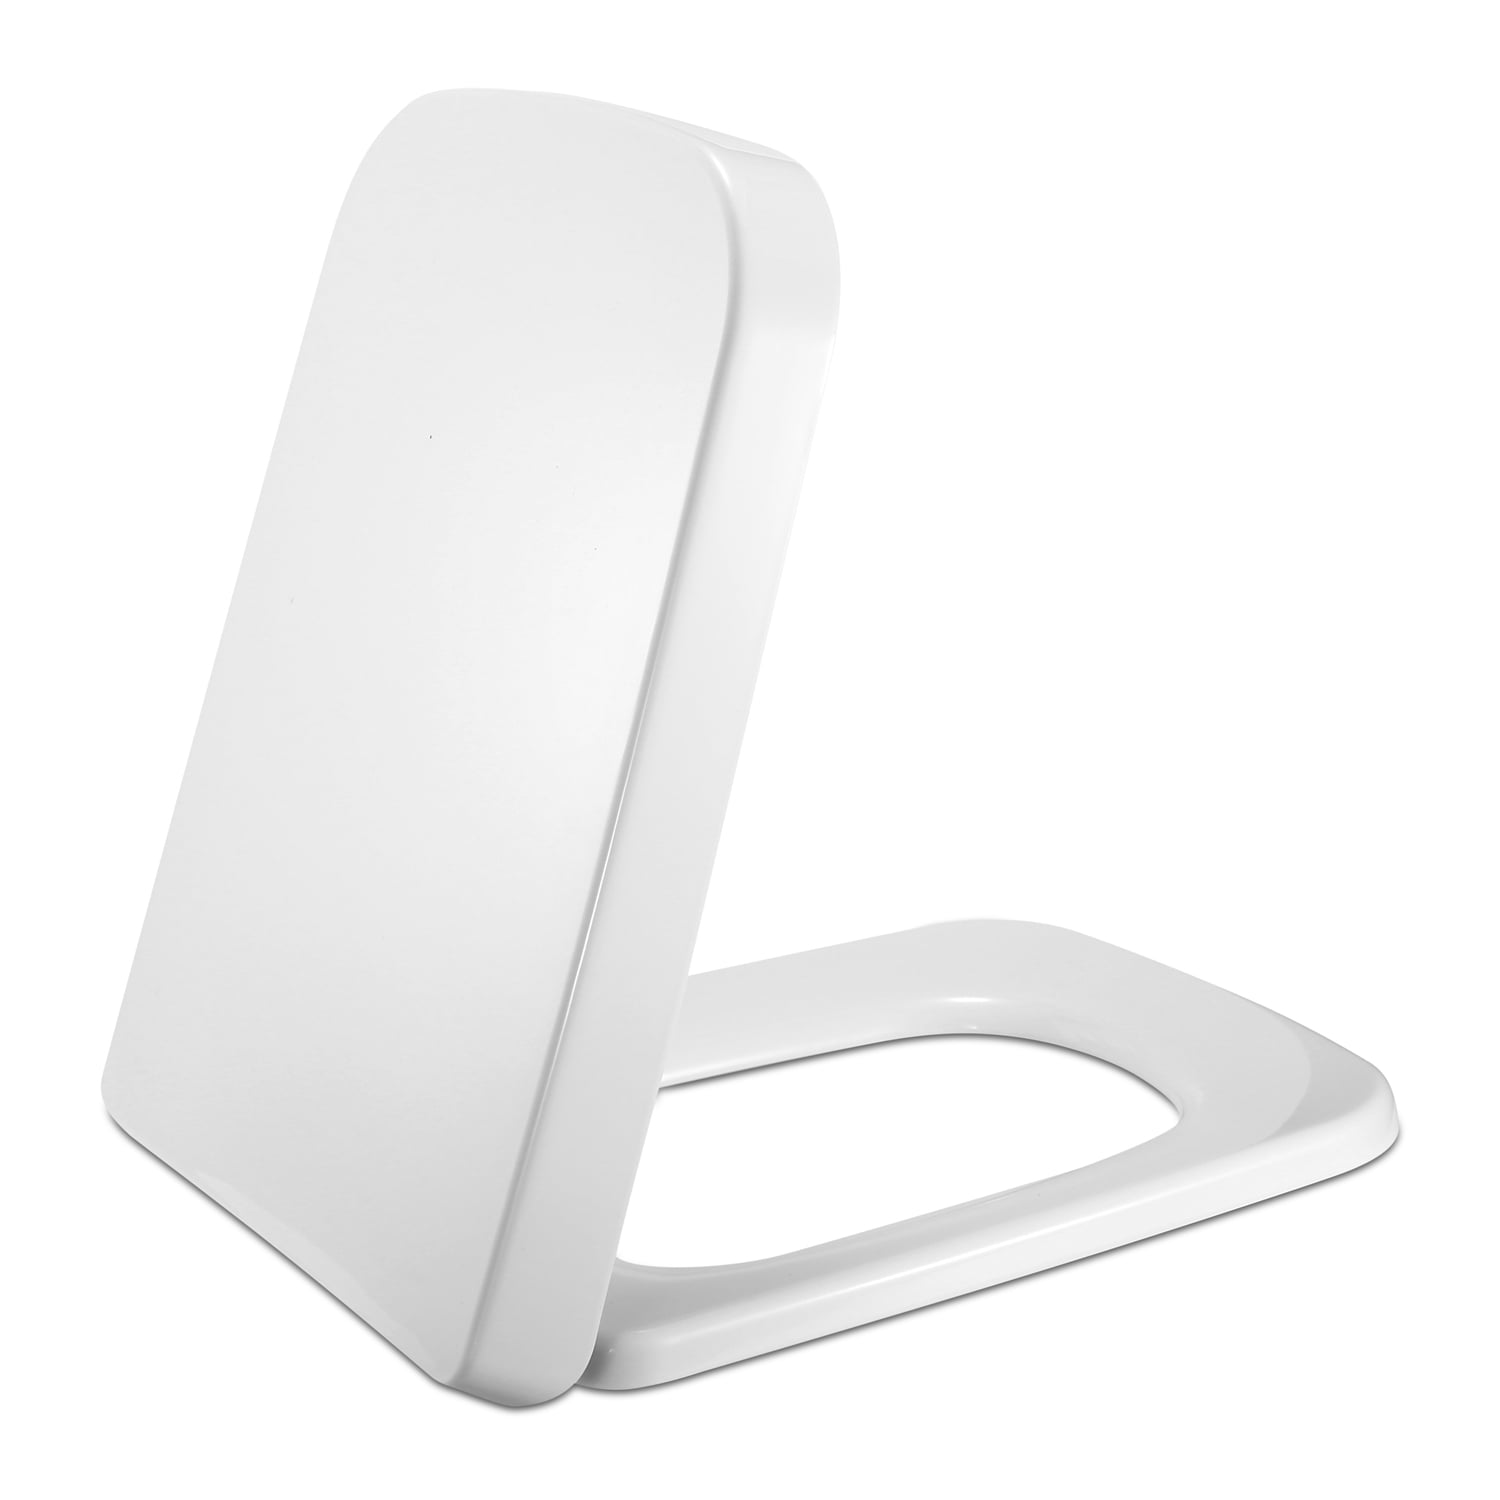 Exclusive Square Toilet Seat Cover (White) (Soft Close) - by Ruhe®